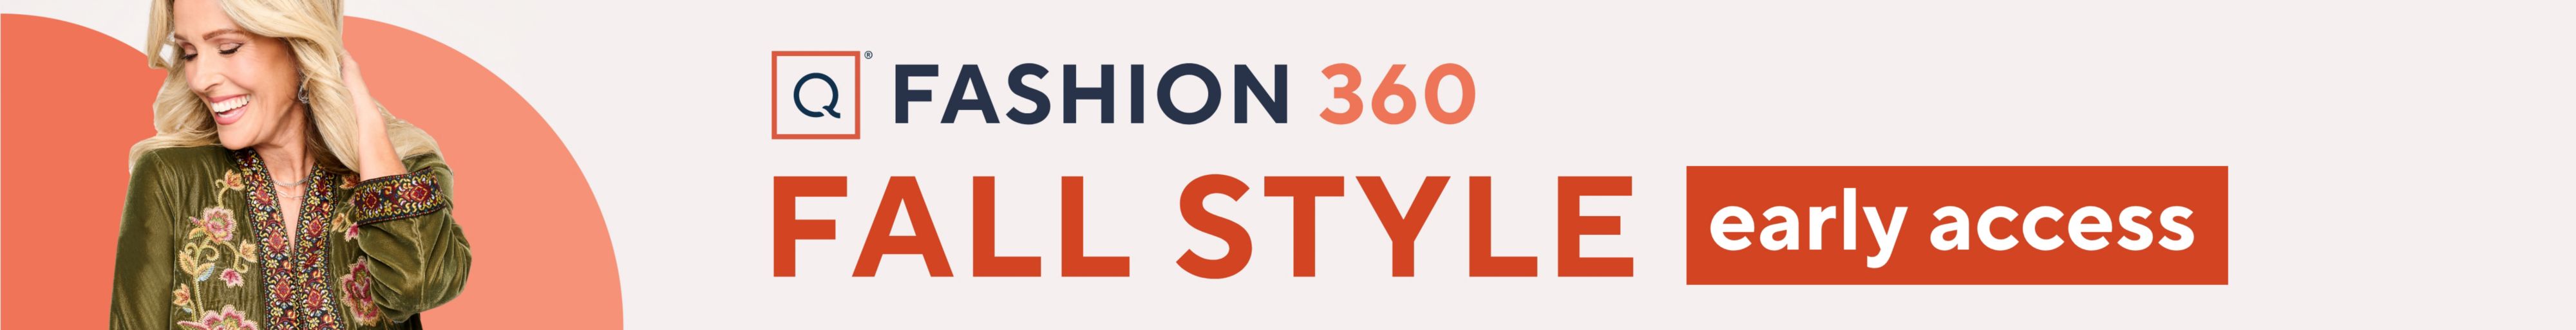 Fashion 360 Fall Style Early Access